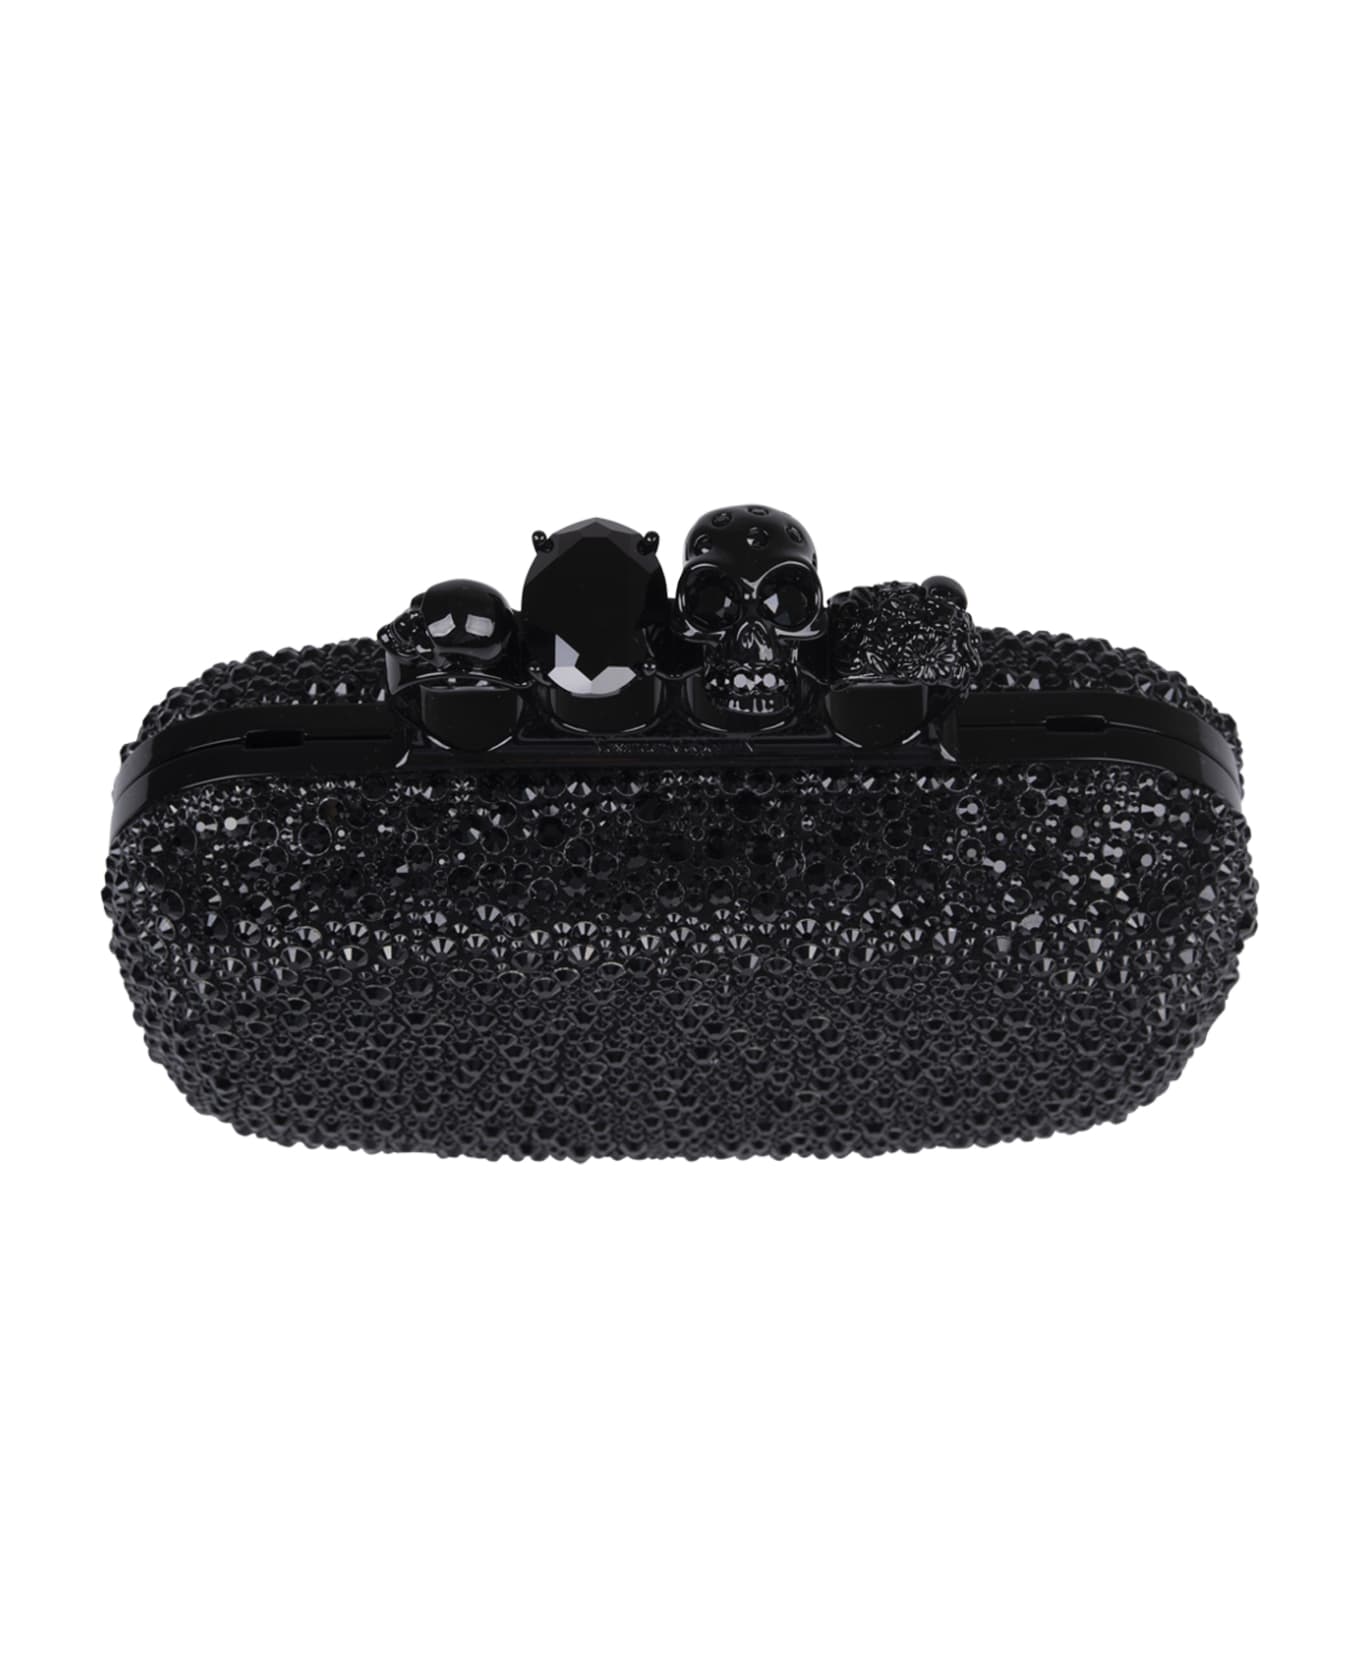 Alexander McQueen Black Skull Four Ring Clutch Bag With Chain - Nero クラッチバッグ